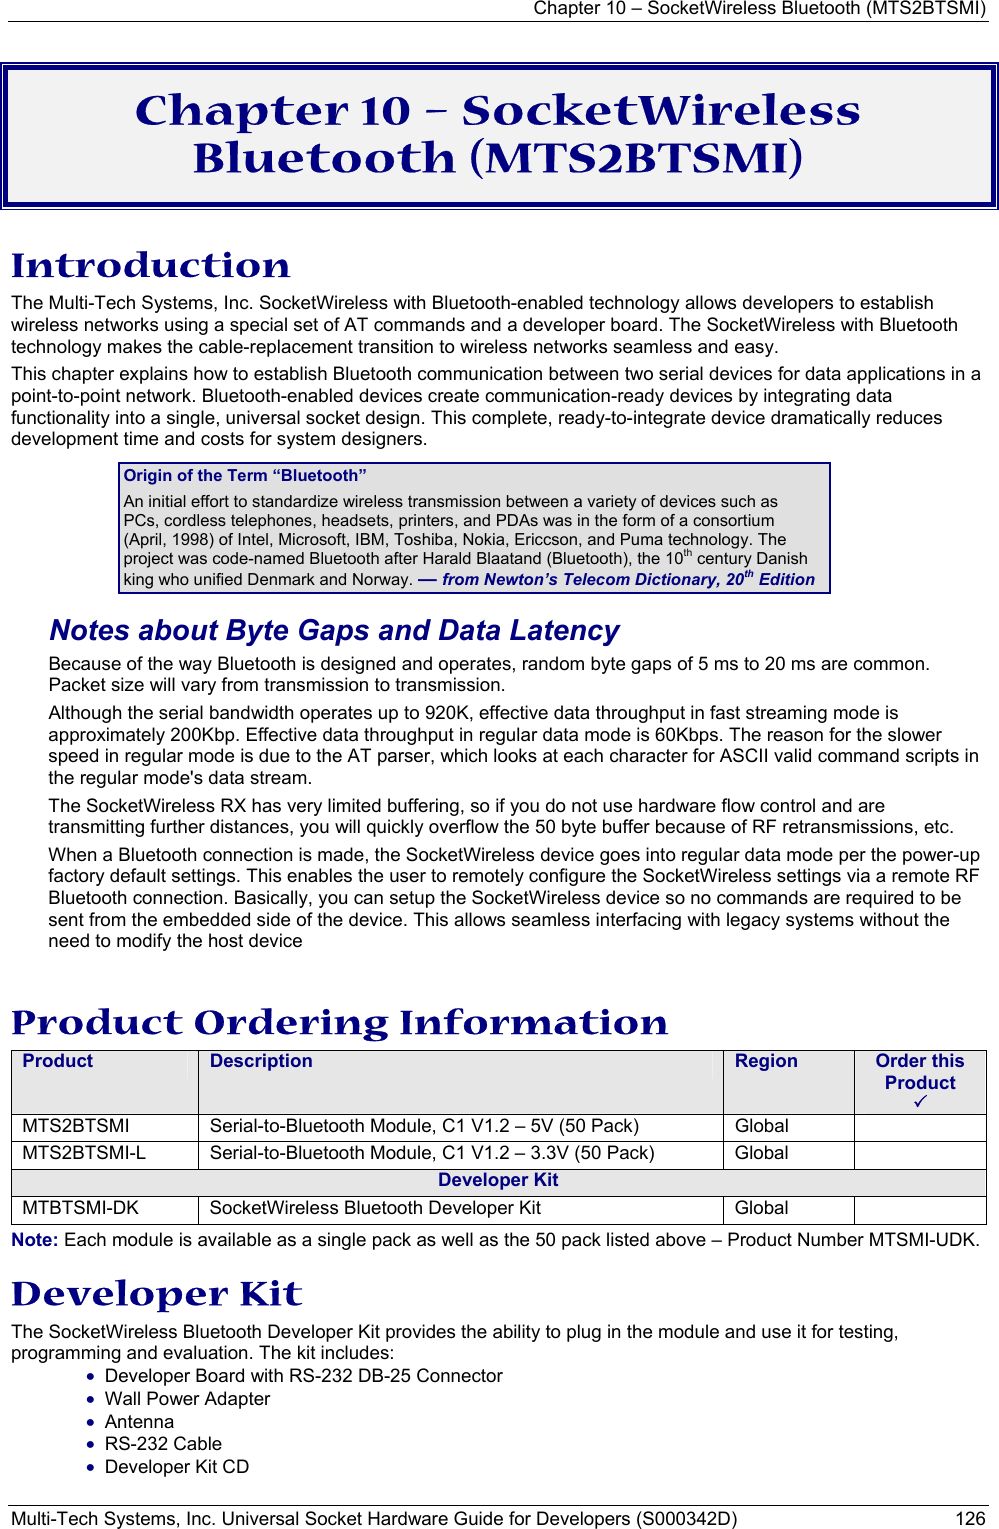 Chapter 10 – SocketWireless Bluetooth (MTS2BTSMI) Multi-Tech Systems, Inc. Universal Socket Hardware Guide for Developers (S000342D)  126  Chapter 10 – SocketWireless Bluetooth (MTS2BTSMI) Introduction The Multi-Tech Systems, Inc. SocketWireless with Bluetooth-enabled technology allows developers to establish wireless networks using a special set of AT commands and a developer board. The SocketWireless with Bluetooth technology makes the cable-replacement transition to wireless networks seamless and easy.  This chapter explains how to establish Bluetooth communication between two serial devices for data applications in a point-to-point network. Bluetooth-enabled devices create communication-ready devices by integrating data functionality into a single, universal socket design. This complete, ready-to-integrate device dramatically reduces development time and costs for system designers. Origin of the Term “Bluetooth” An initial effort to standardize wireless transmission between a variety of devices such as PCs, cordless telephones, headsets, printers, and PDAs was in the form of a consortium (April, 1998) of Intel, Microsoft, IBM, Toshiba, Nokia, Ericcson, and Puma technology. The project was code-named Bluetooth after Harald Blaatand (Bluetooth), the 10th century Danish king who unified Denmark and Norway. — from Newton’s Telecom Dictionary, 20th Edition Notes about Byte Gaps and Data Latency Because of the way Bluetooth is designed and operates, random byte gaps of 5 ms to 20 ms are common. Packet size will vary from transmission to transmission.  Although the serial bandwidth operates up to 920K, effective data throughput in fast streaming mode is approximately 200Kbp. Effective data throughput in regular data mode is 60Kbps. The reason for the slower speed in regular mode is due to the AT parser, which looks at each character for ASCII valid command scripts in the regular mode&apos;s data stream.  The SocketWireless RX has very limited buffering, so if you do not use hardware flow control and are transmitting further distances, you will quickly overflow the 50 byte buffer because of RF retransmissions, etc.   When a Bluetooth connection is made, the SocketWireless device goes into regular data mode per the power-up factory default settings. This enables the user to remotely configure the SocketWireless settings via a remote RF Bluetooth connection. Basically, you can setup the SocketWireless device so no commands are required to be sent from the embedded side of the device. This allows seamless interfacing with legacy systems without the need to modify the host device  Product Ordering Information Product  Description  Region  Order this Product   3 MTS2BTSMI Serial-to-Bluetooth Module, C1 V1.2 – 5V (50 Pack)    Global   MTS2BTSMI-L  Serial-to-Bluetooth Module, C1 V1.2 – 3.3V (50 Pack)     Global   Developer Kit MTBTSMI-DK  SocketWireless Bluetooth Developer Kit  Global   Note: Each module is available as a single pack as well as the 50 pack listed above – Product Number MTSMI-UDK.  Developer Kit The SocketWireless Bluetooth Developer Kit provides the ability to plug in the module and use it for testing, programming and evaluation. The kit includes: • Developer Board with RS-232 DB-25 Connector • Wall Power Adapter • Antenna • RS-232 Cable • Developer Kit CD 